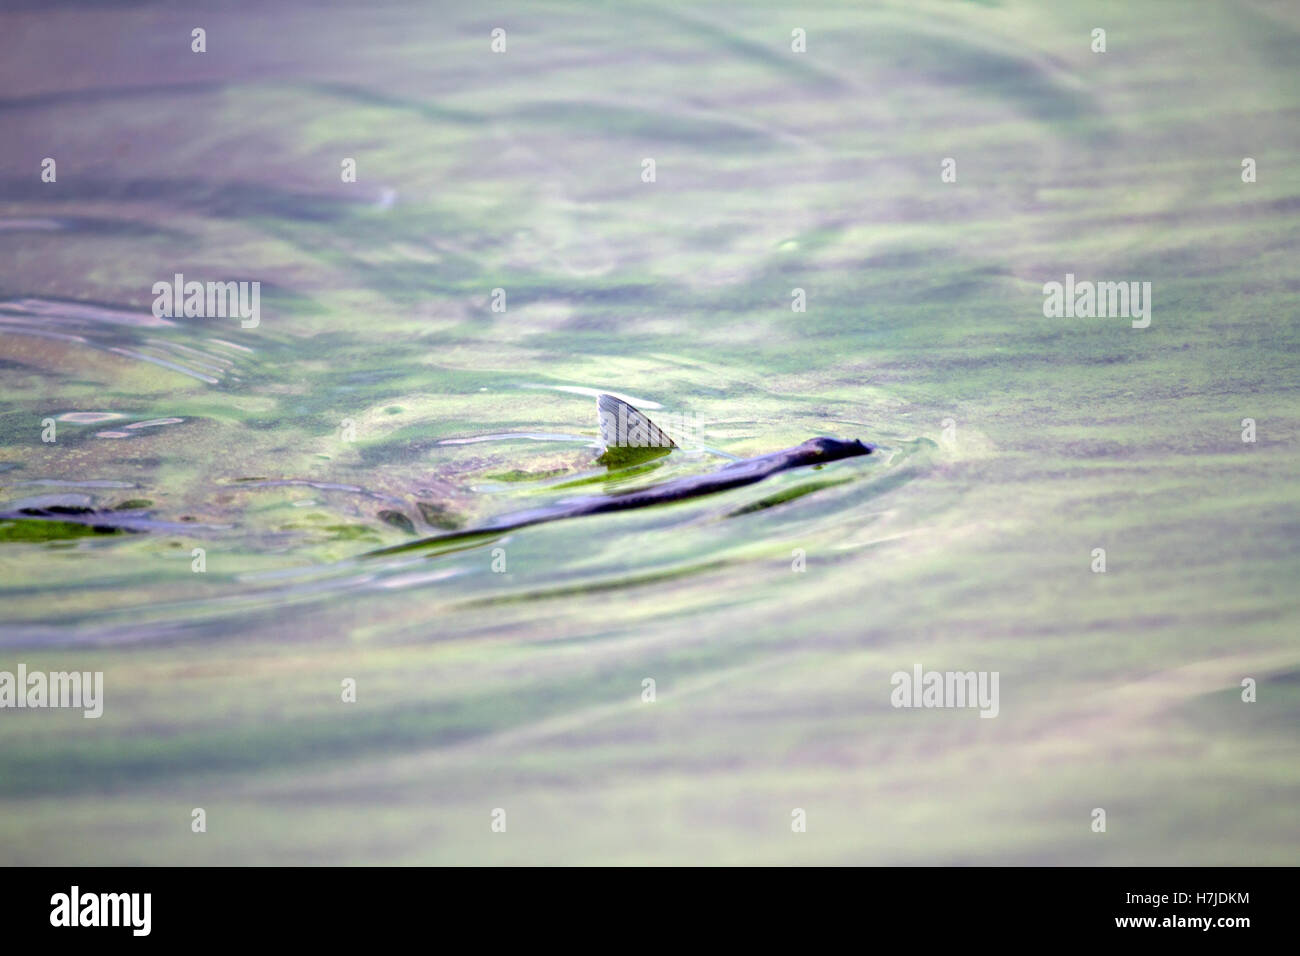 fish poisoned with the dying  green scum Stock Photo